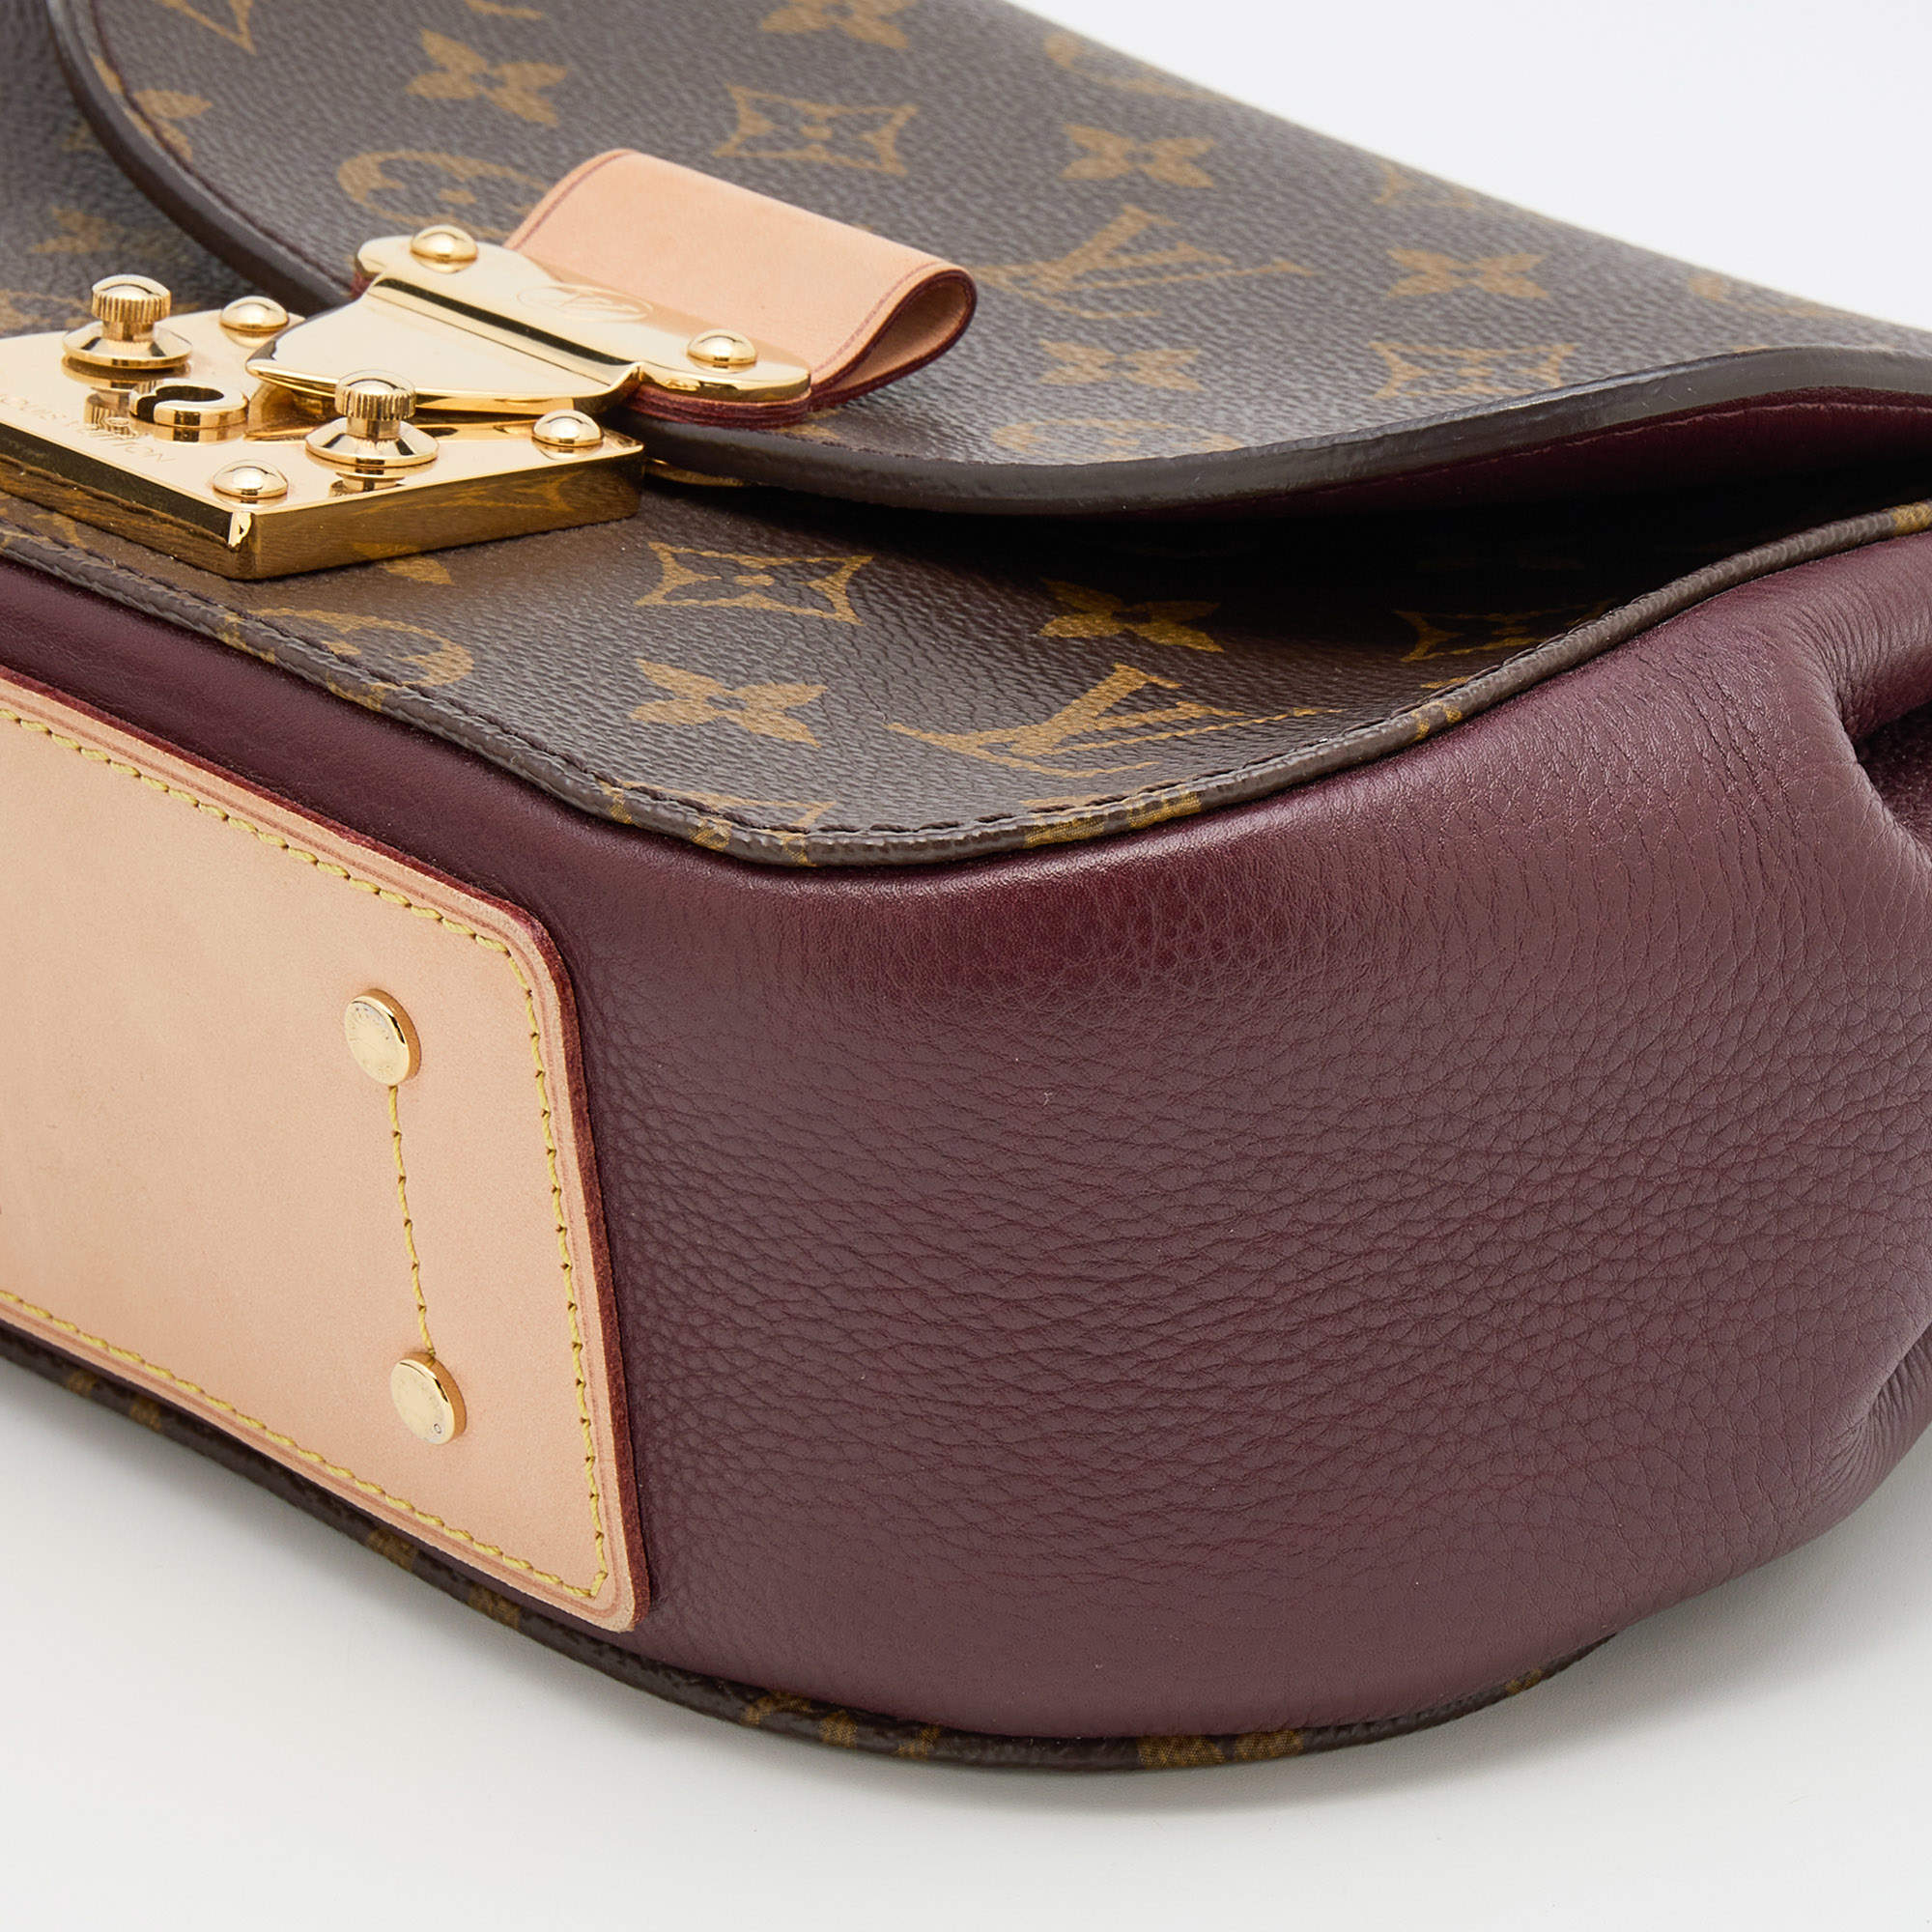 Ombré the new permanent line of leather goods - LV - A&E Magazine